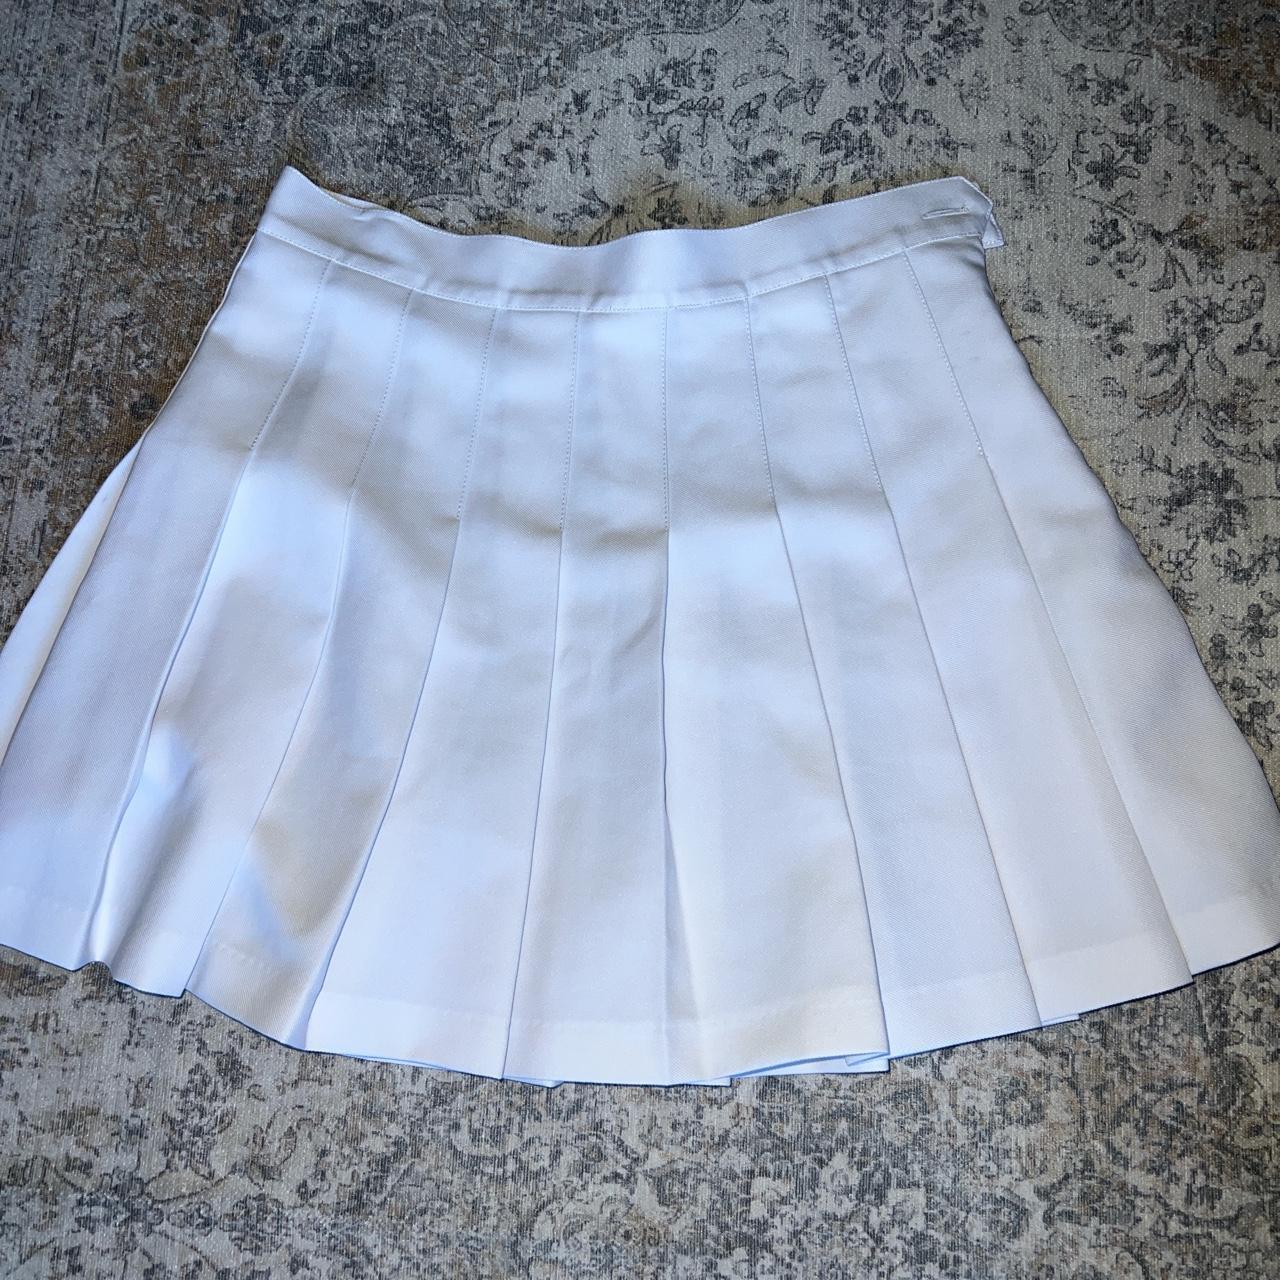 ADORABLE white tennis skirt, perfect for going out... - Depop